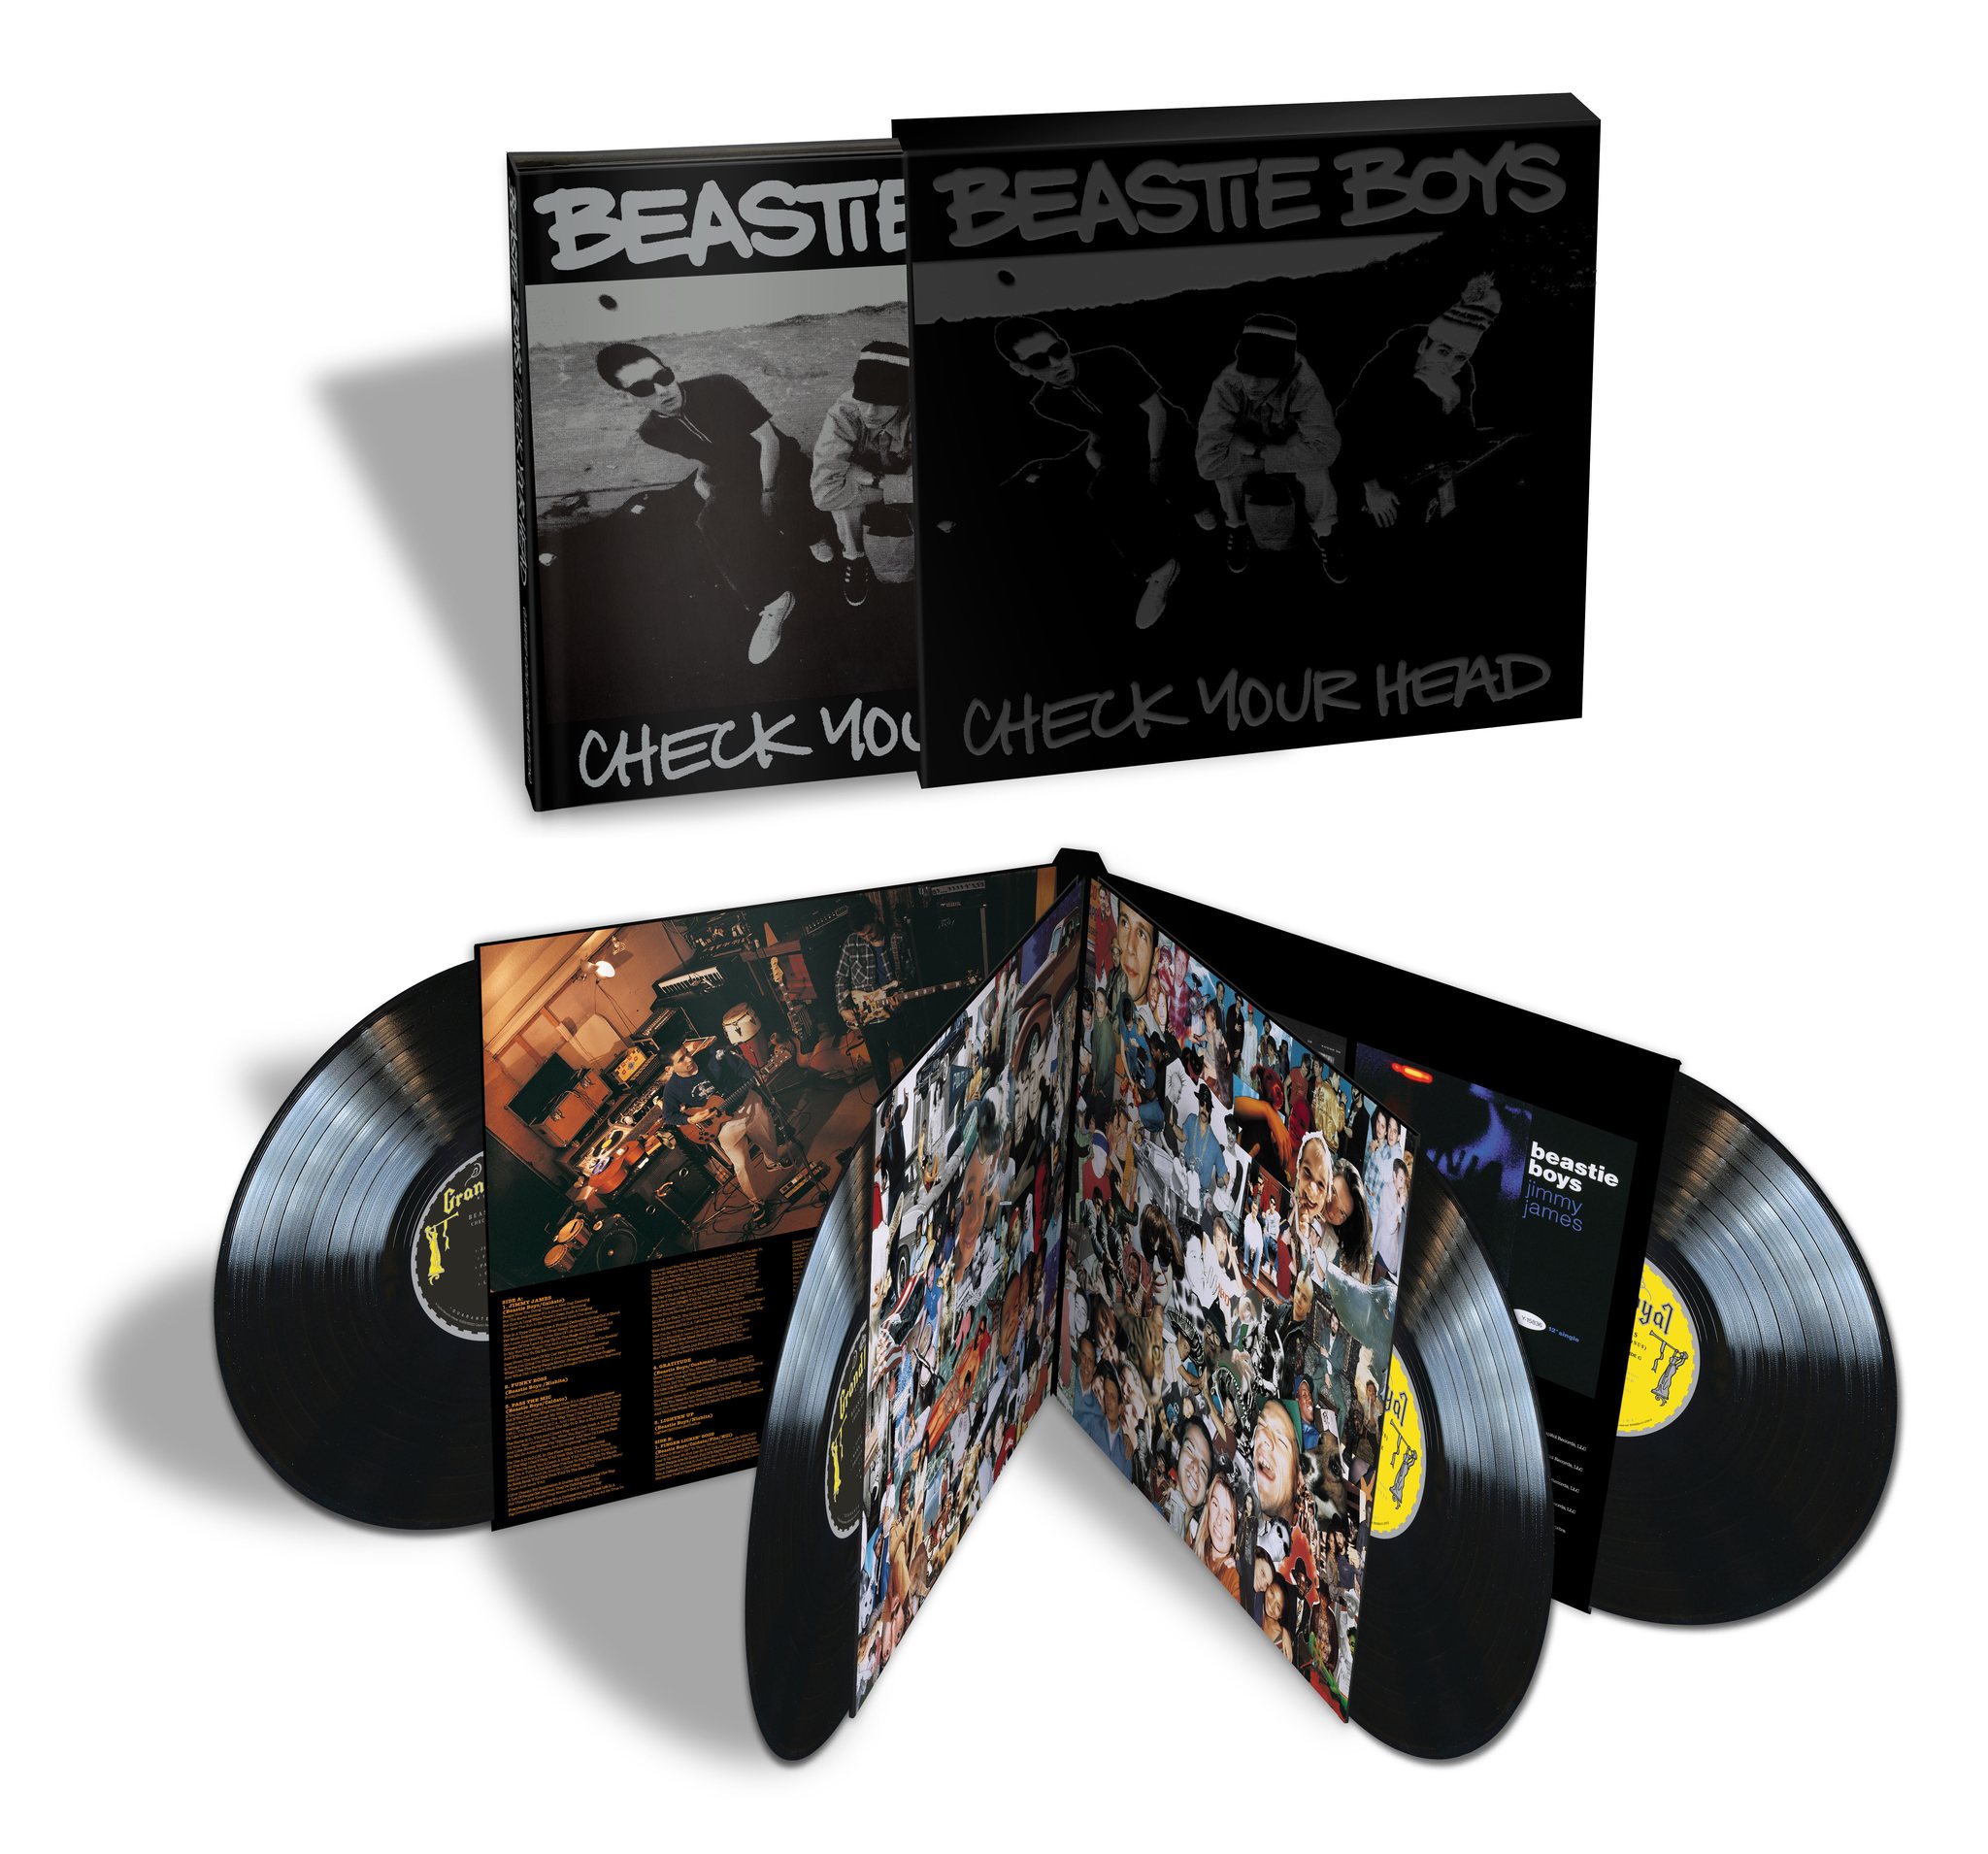 Beastie Boys’ Long Out-Of-Print 4LP Deluxe Edition Of The Multi-Platinum Album 'Check Your Head' - OUT NOW!